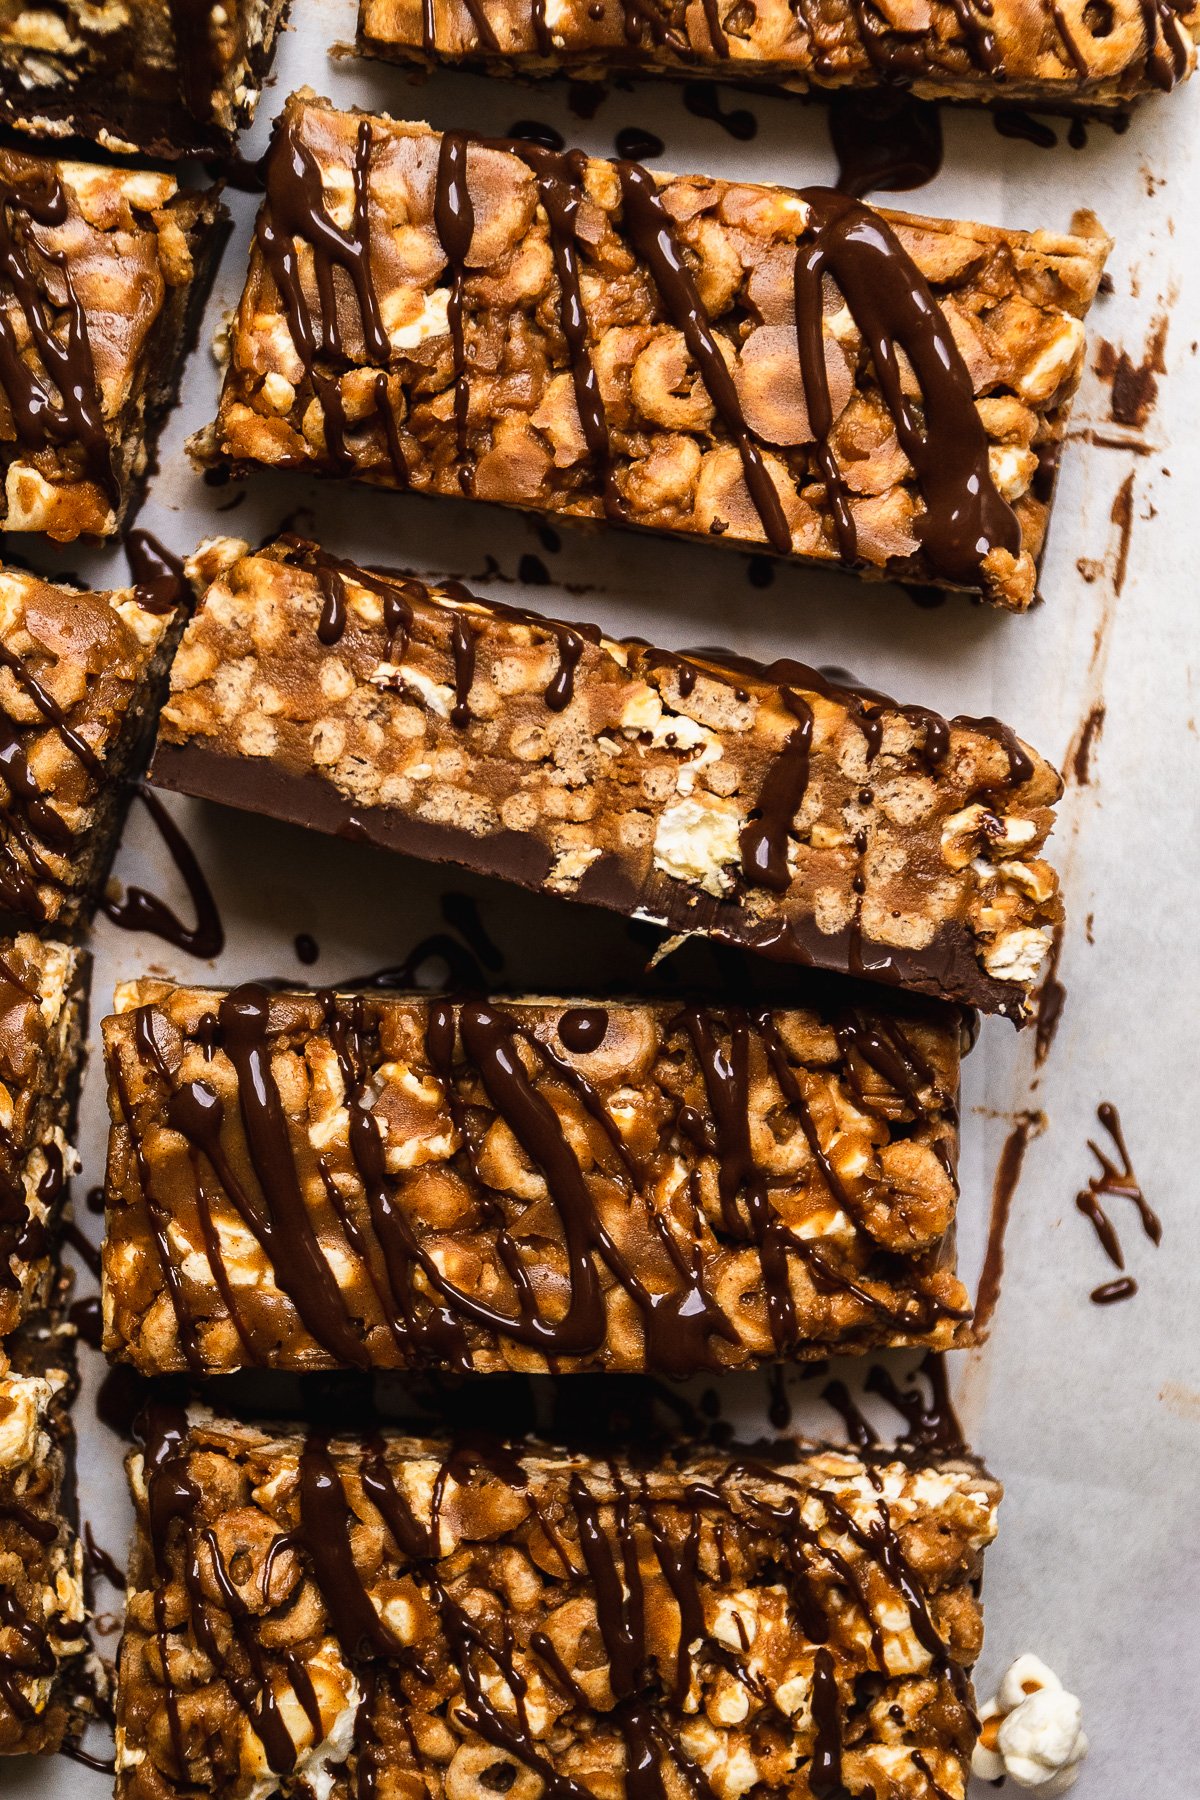 Peanut butter cheerio bars with chocolate drizzled on top.